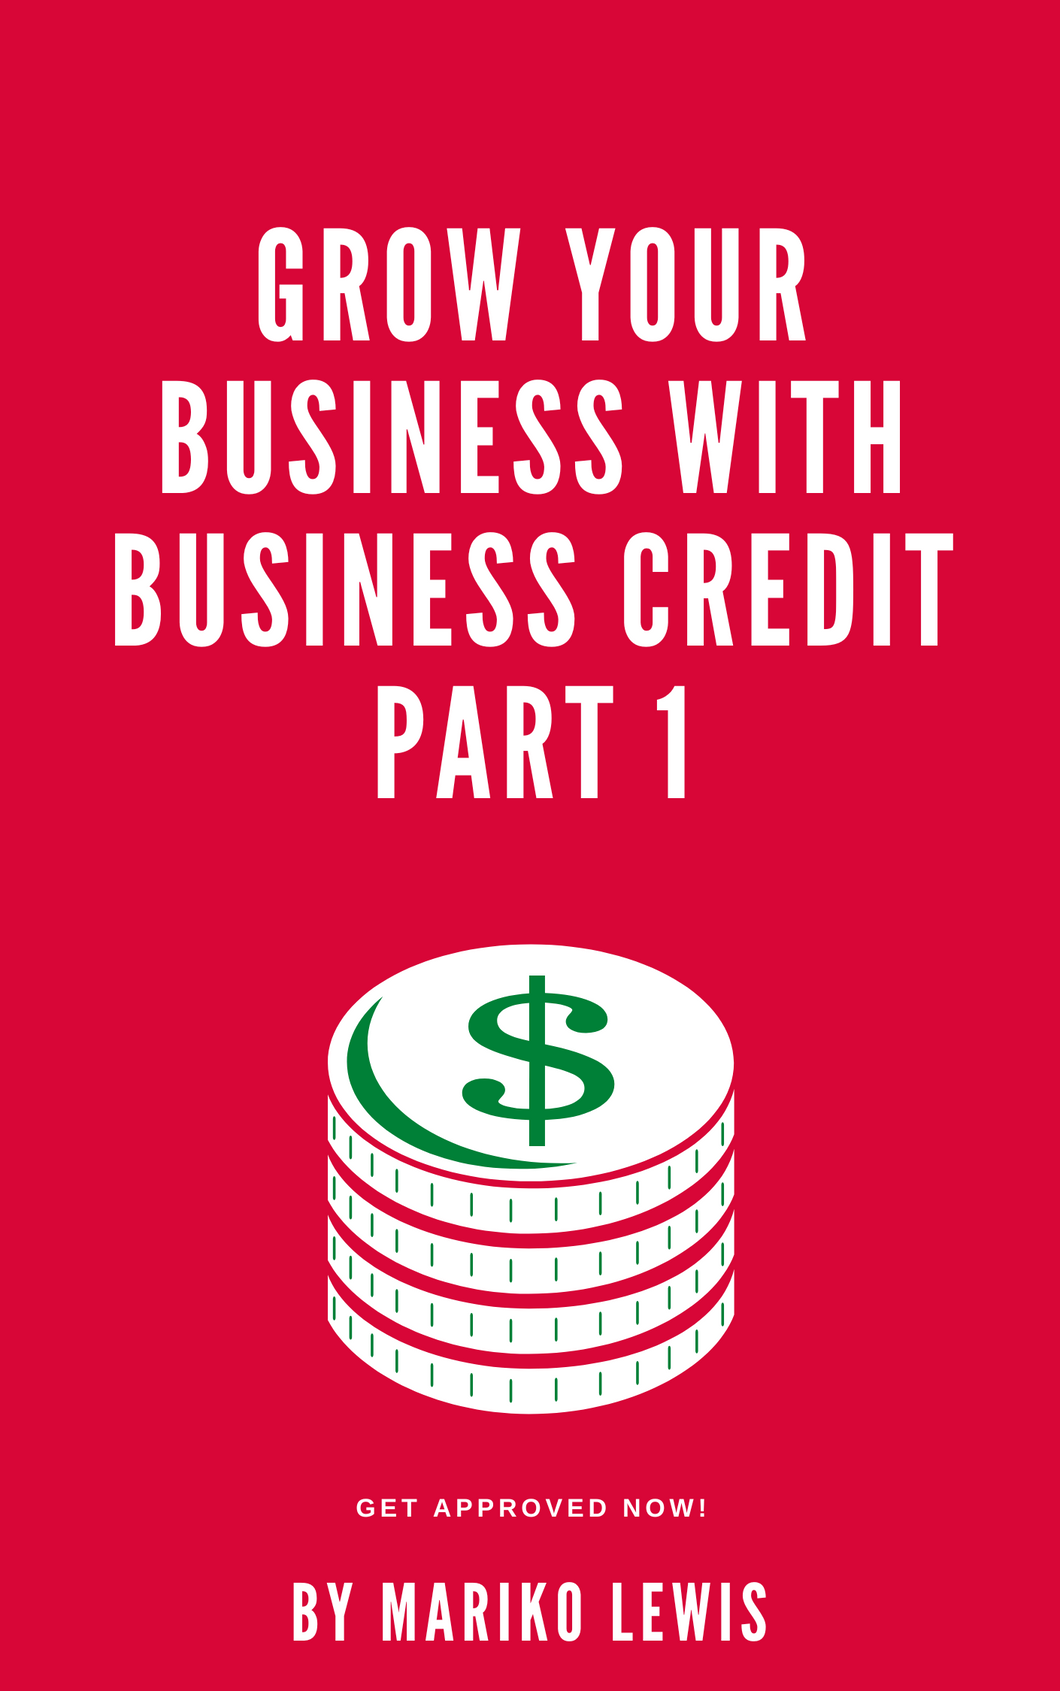 Grow Your Business with Business Credit Part 1